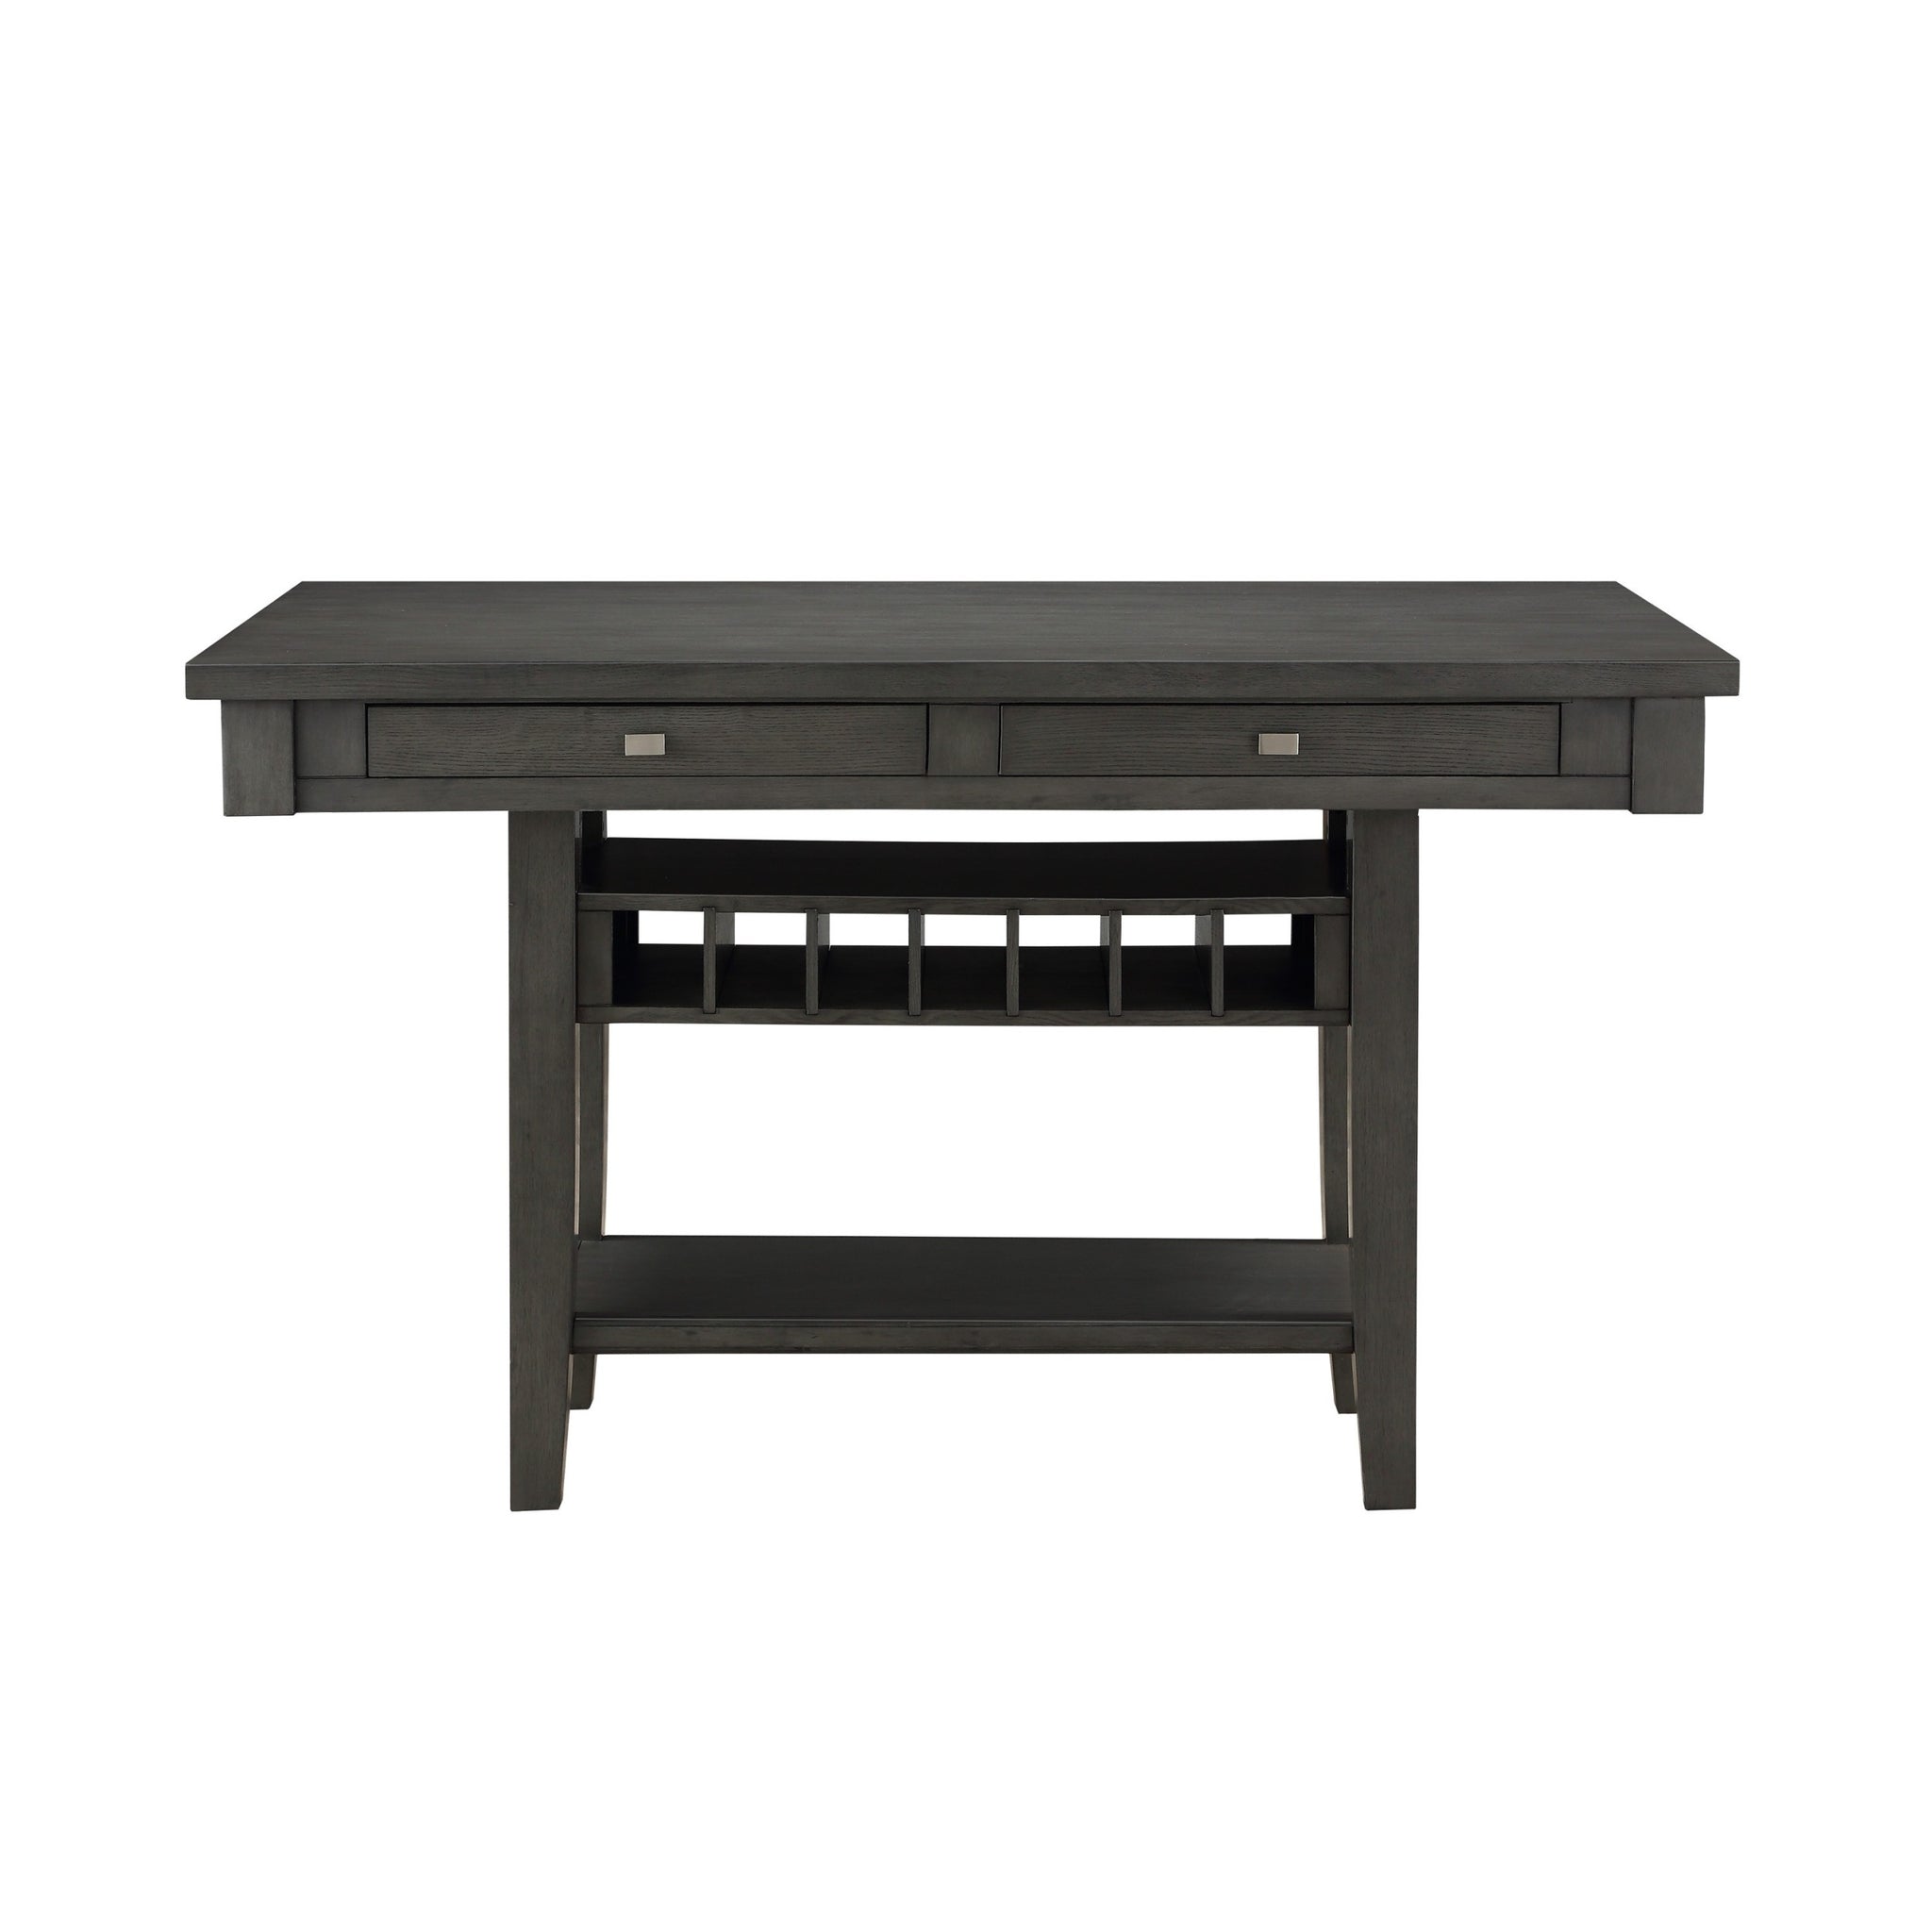 Transitional Gray Finish 1pc Counter Height Table with gray-dining room-transitional-wood